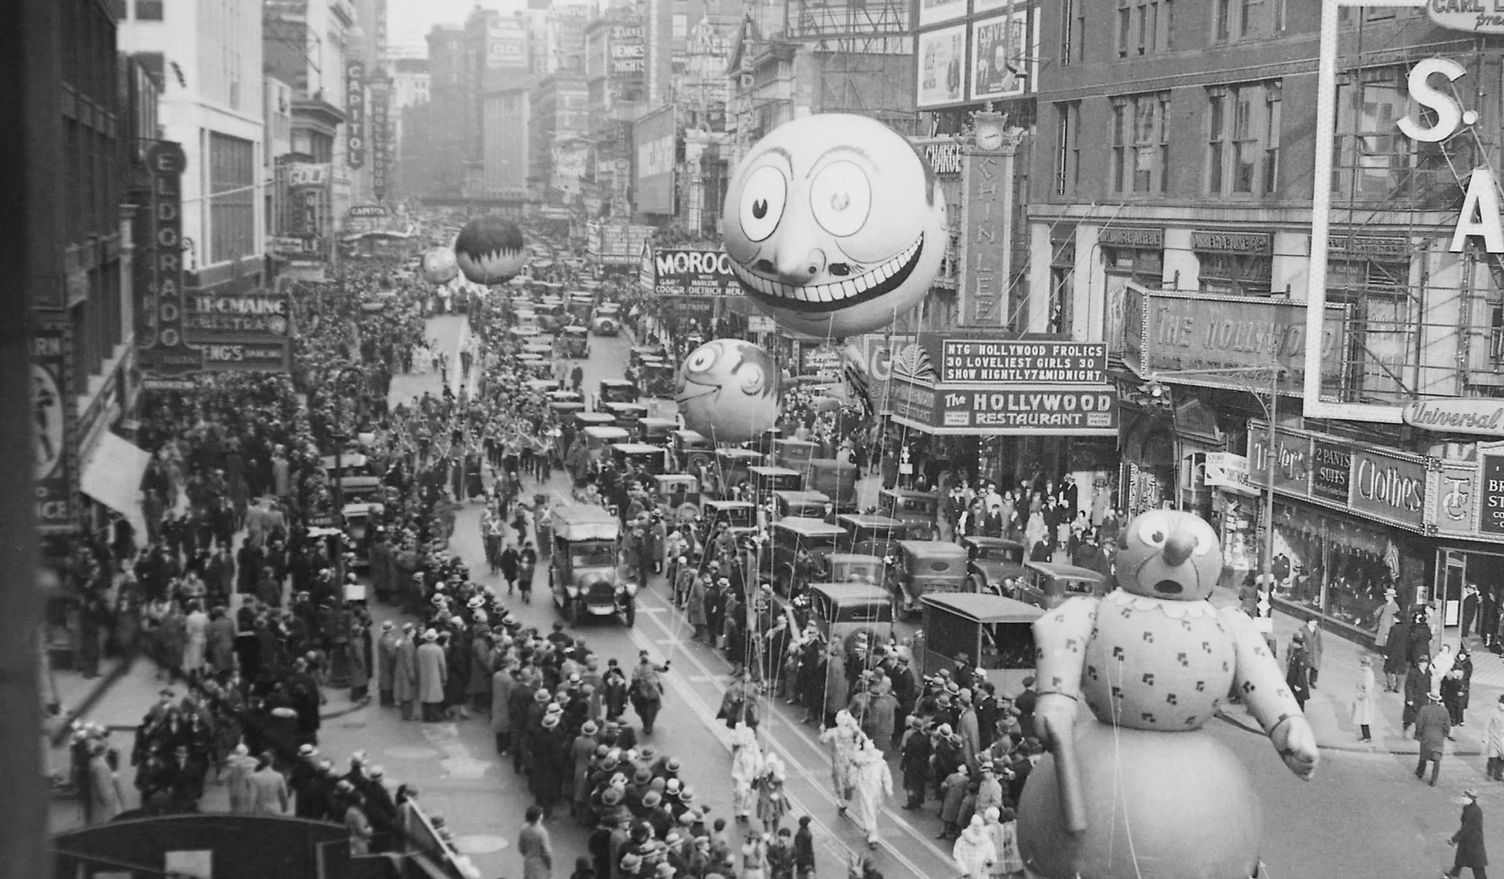 macy's thanksgiving day parade balloon release 1920s - 9 10 il Be S. A Moroc Une Etetletioplice Blevelet Gile Listentials The Hollywood Restaurantes So Ww